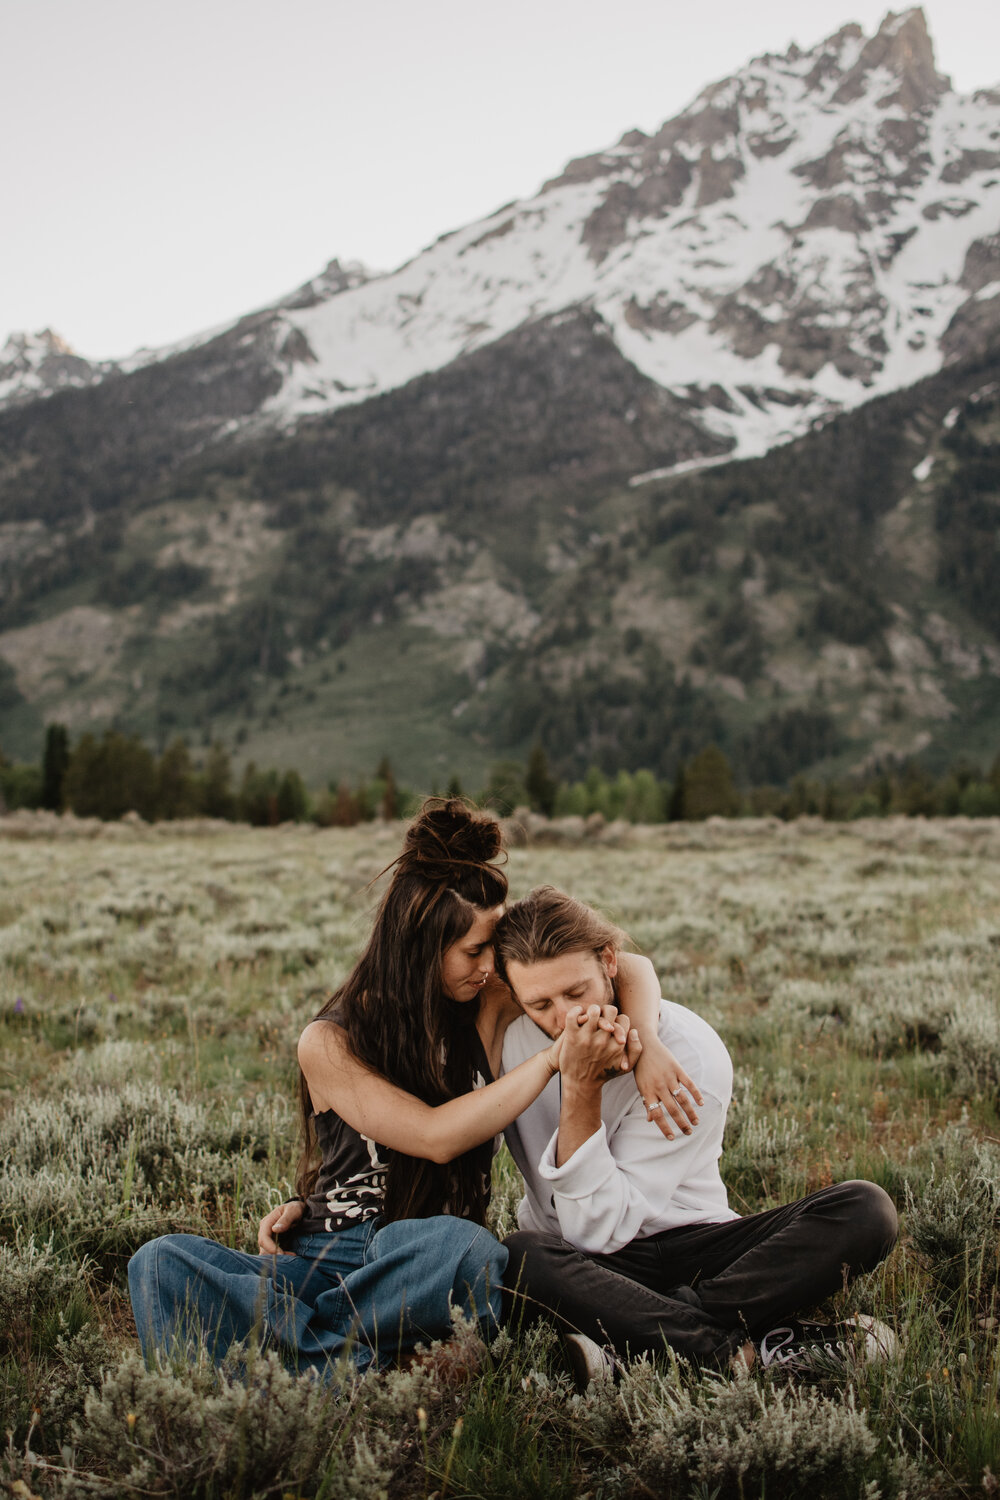 Jocilyn Bennett Photography | Engagement Pose Ideas | Destination Wedding Photographer | Elopement Wedding Photographer | National Park Elopement Photography | Capturing raw and genuine emotion | Utah Photographer | Utah wedding Photographer | Idaho photographer | Idaho wedding photographer | National Park Weddings | Outfit ideas for engagements | Mountain engagements | Adventure Photographer | Movement photography | Bohemian photography | Bohemian wedding | Jackson Hole Photography | Genuine Storytelling Images |